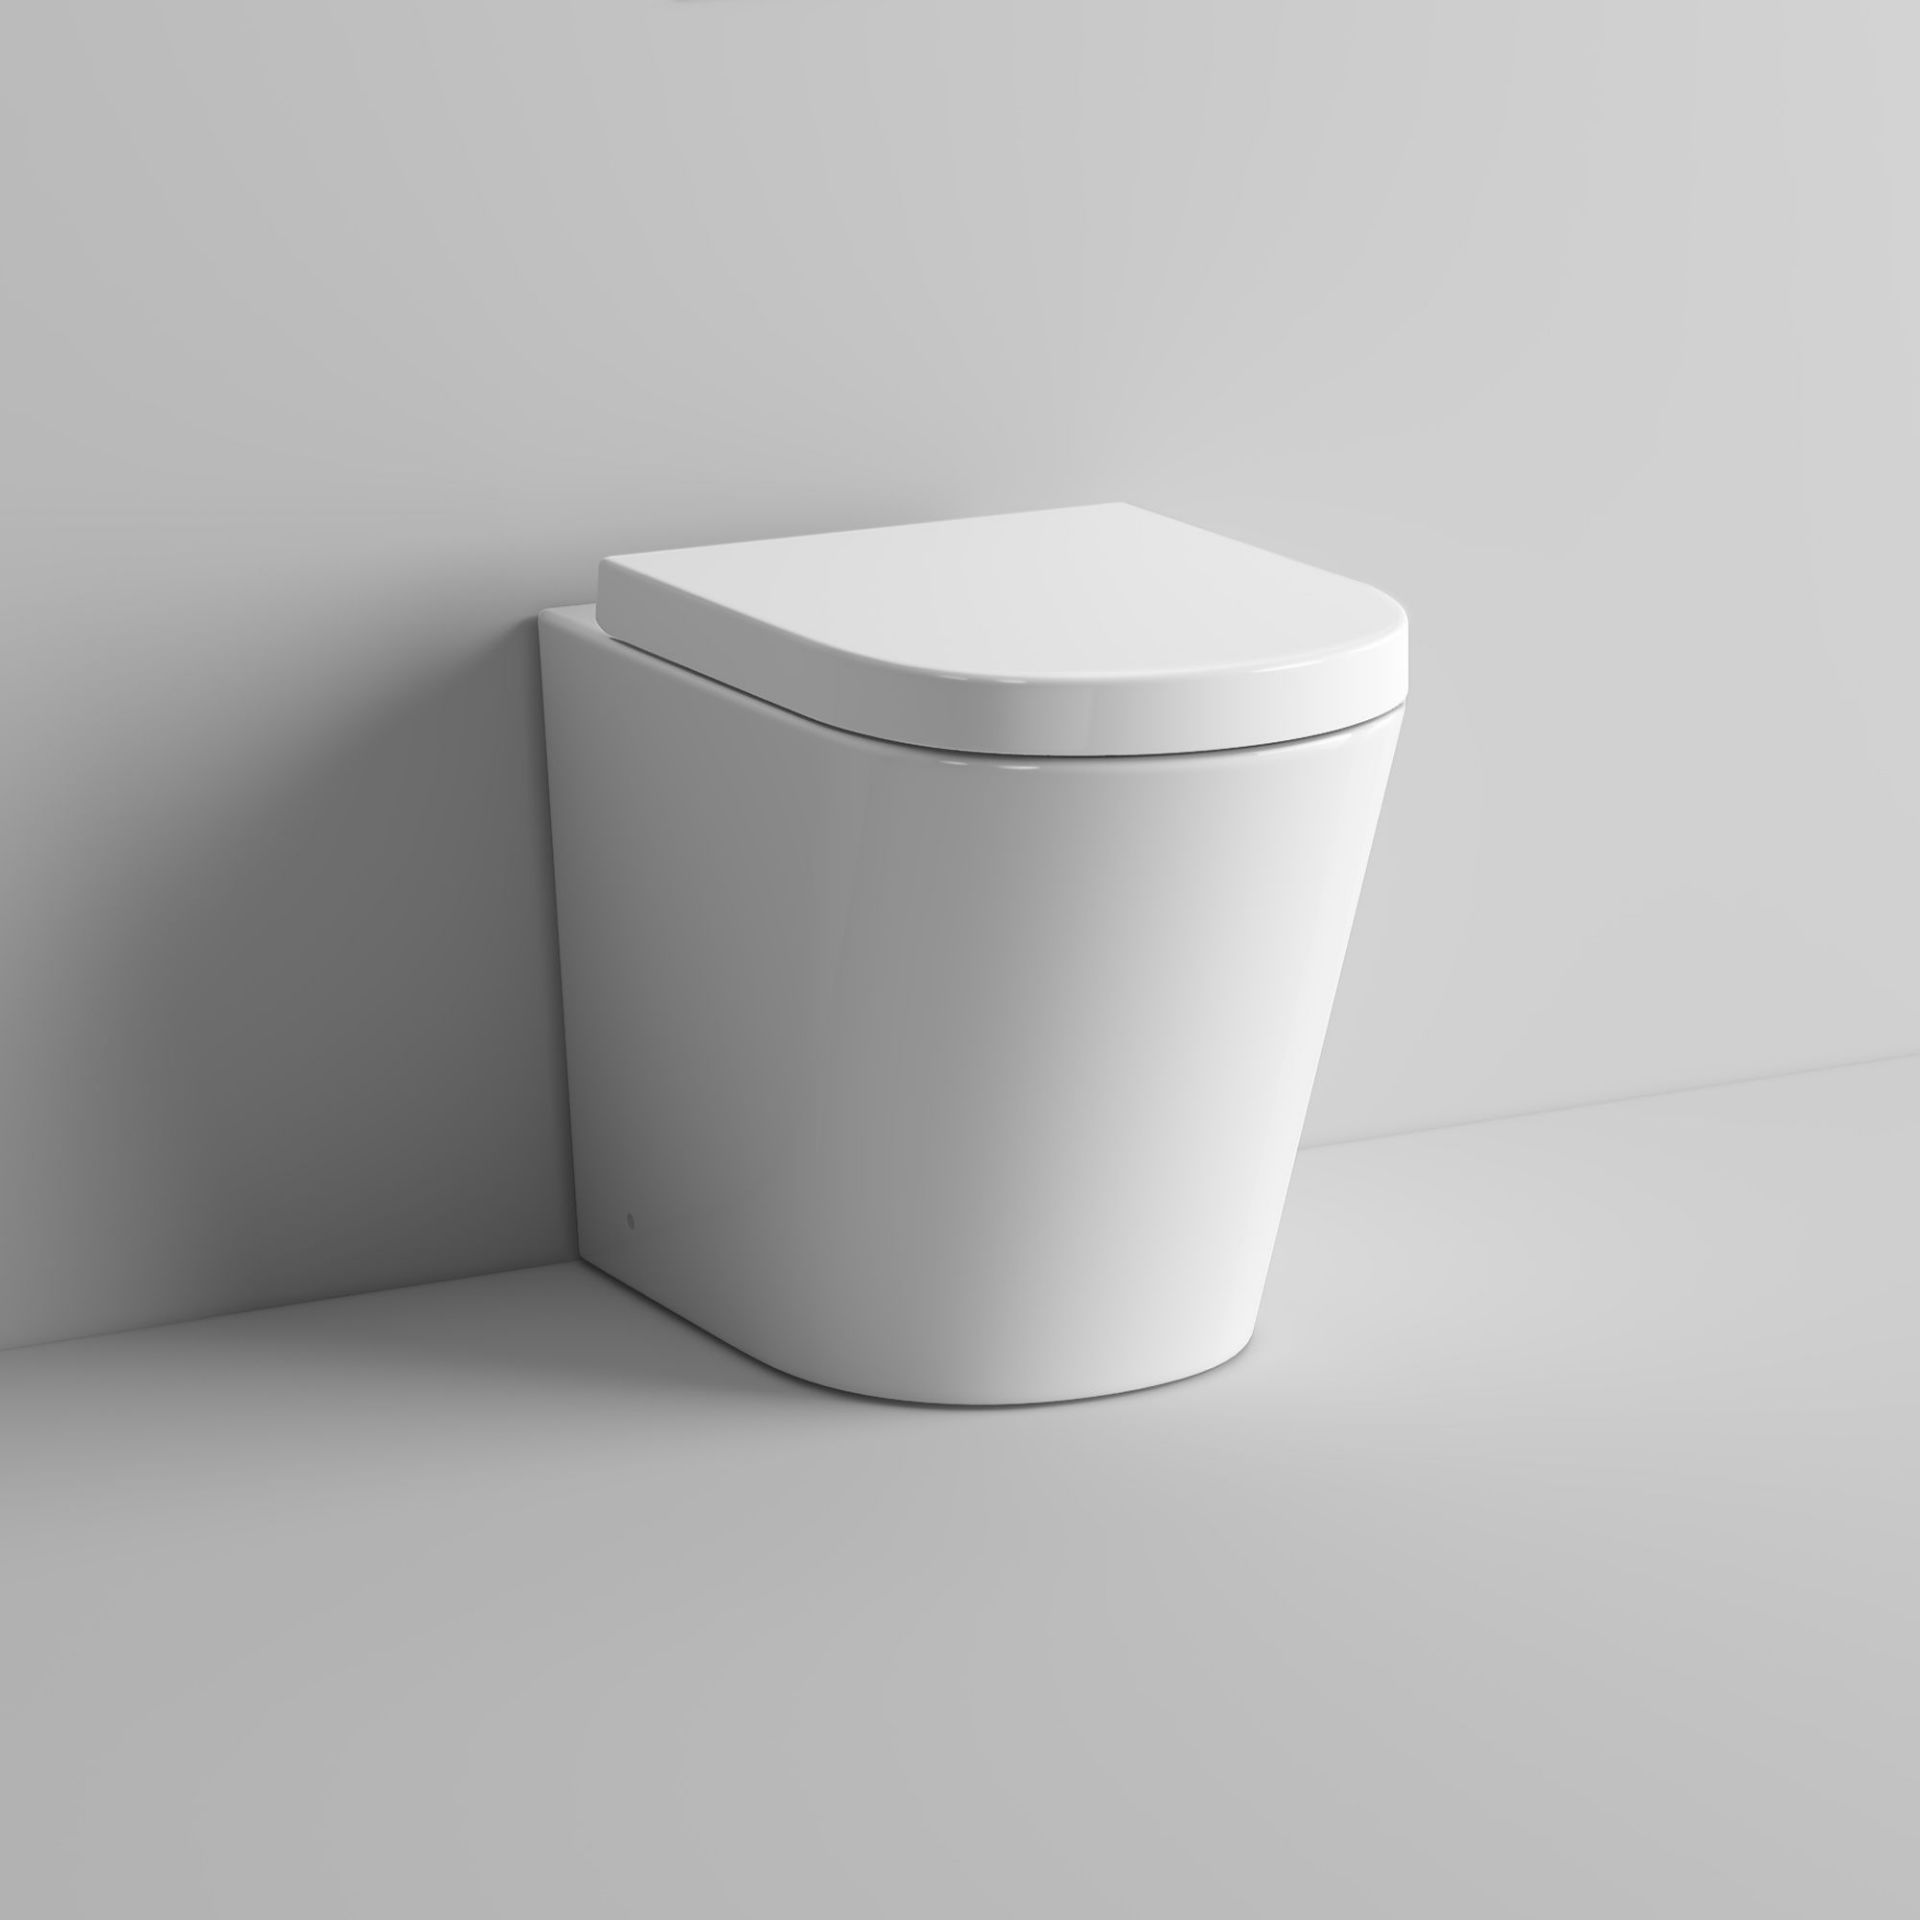 (OS106) Lyon Back to Wall Toilet inc Luxury Soft Close Seat Our Lyon back to wall toilet is made - Image 3 of 3